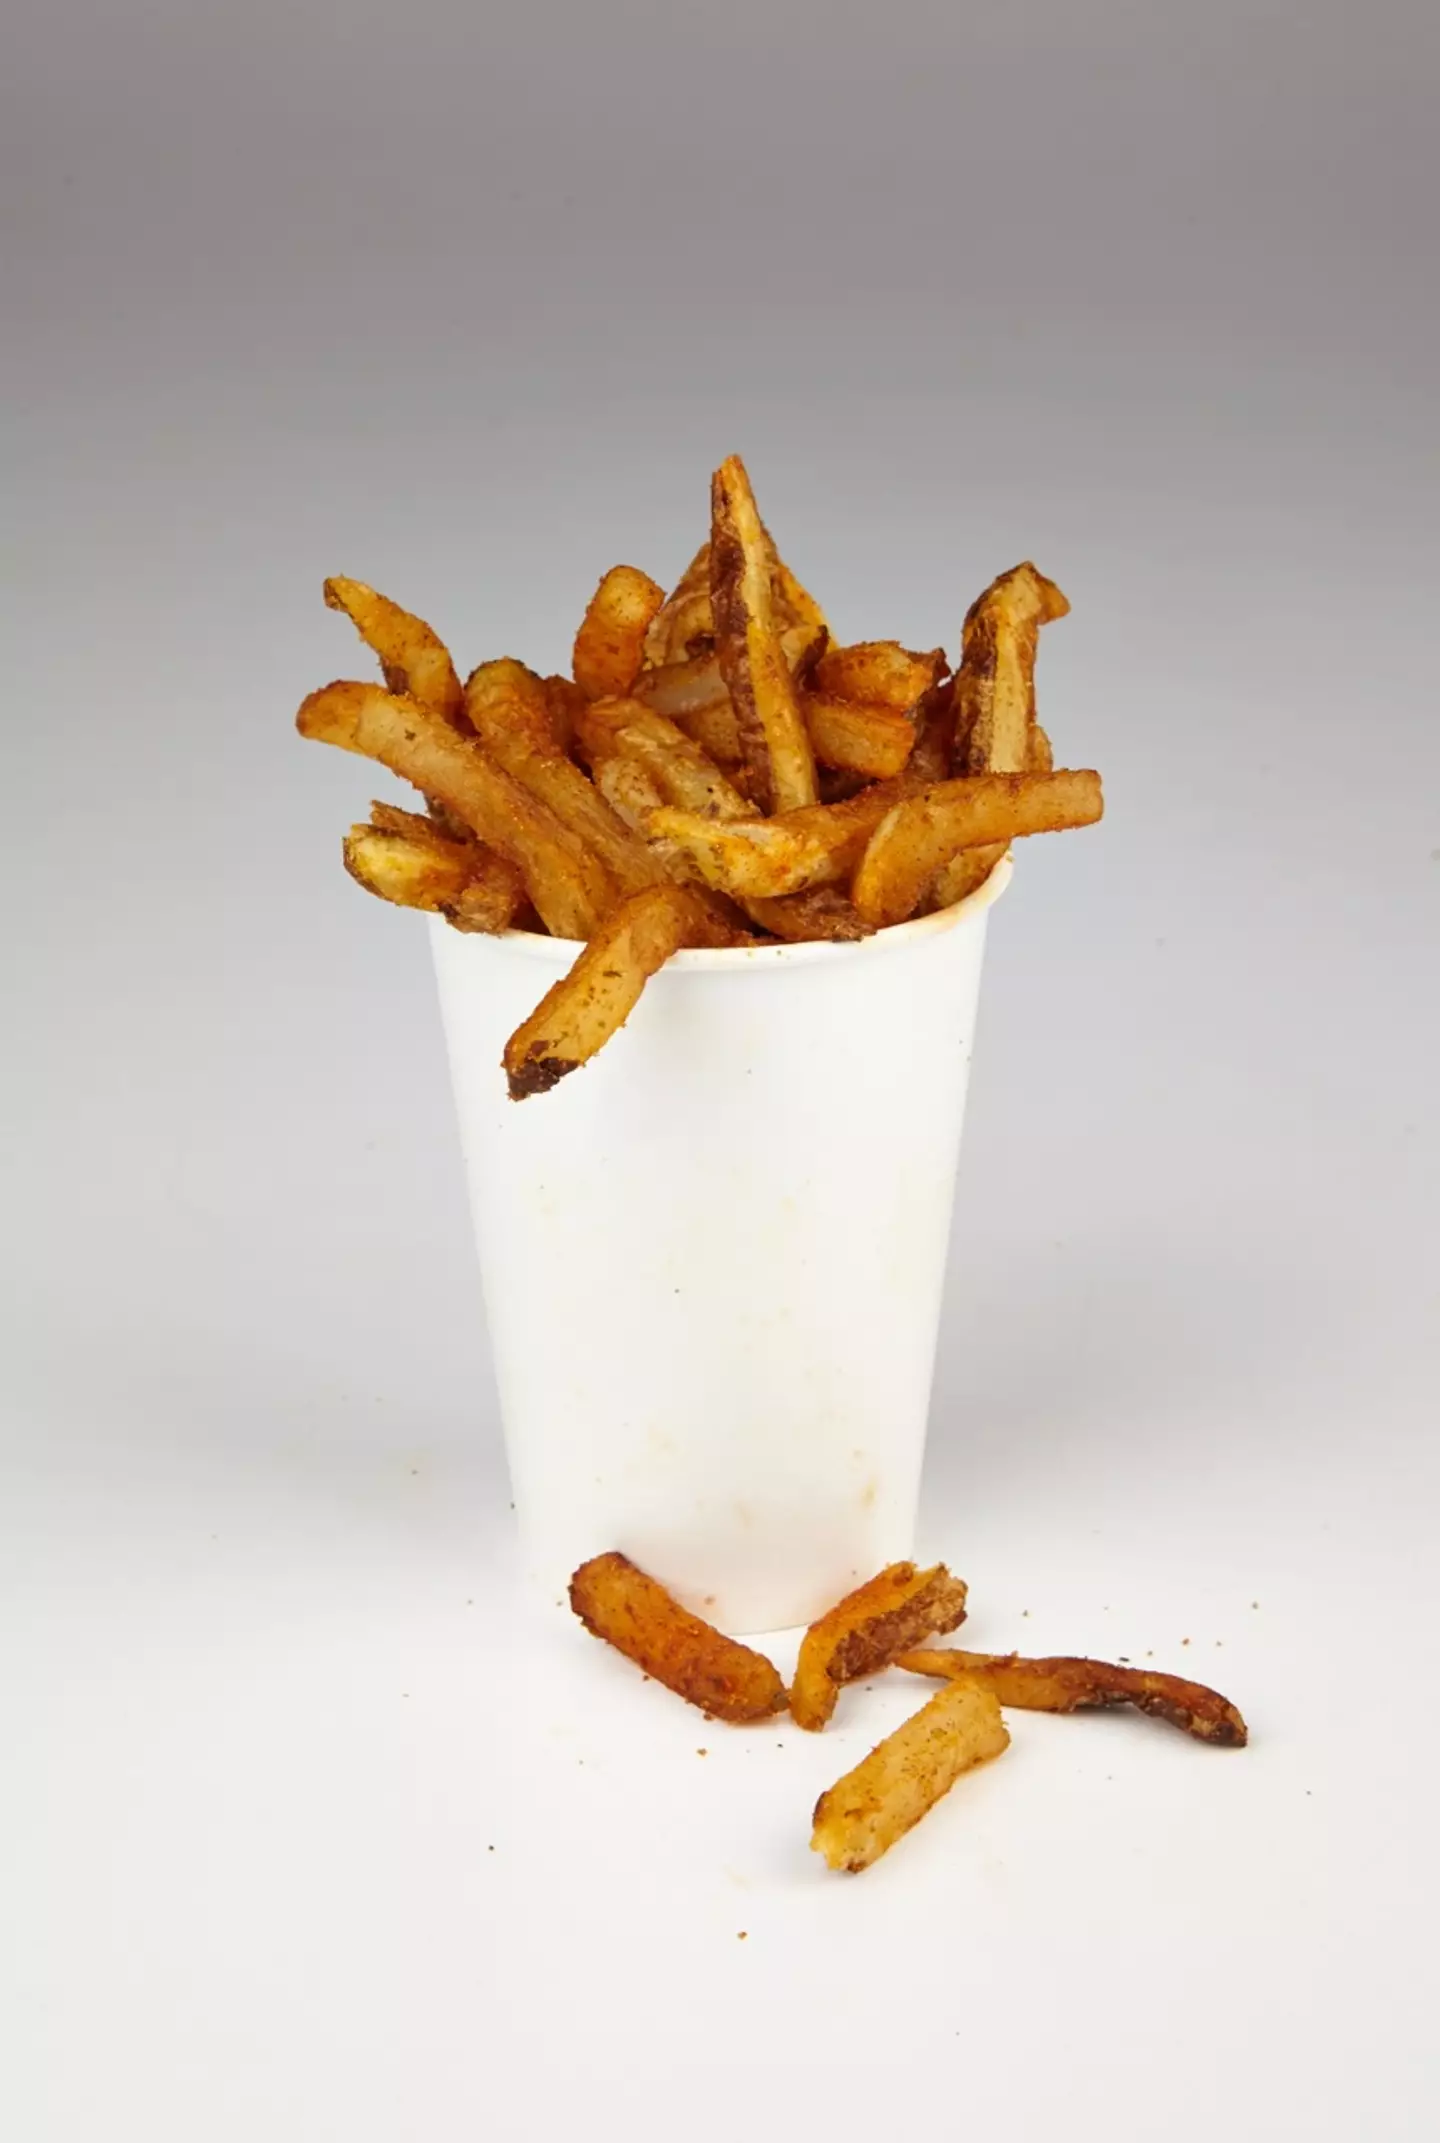 Five Guys' chips are cooked differently to other fast food chains.